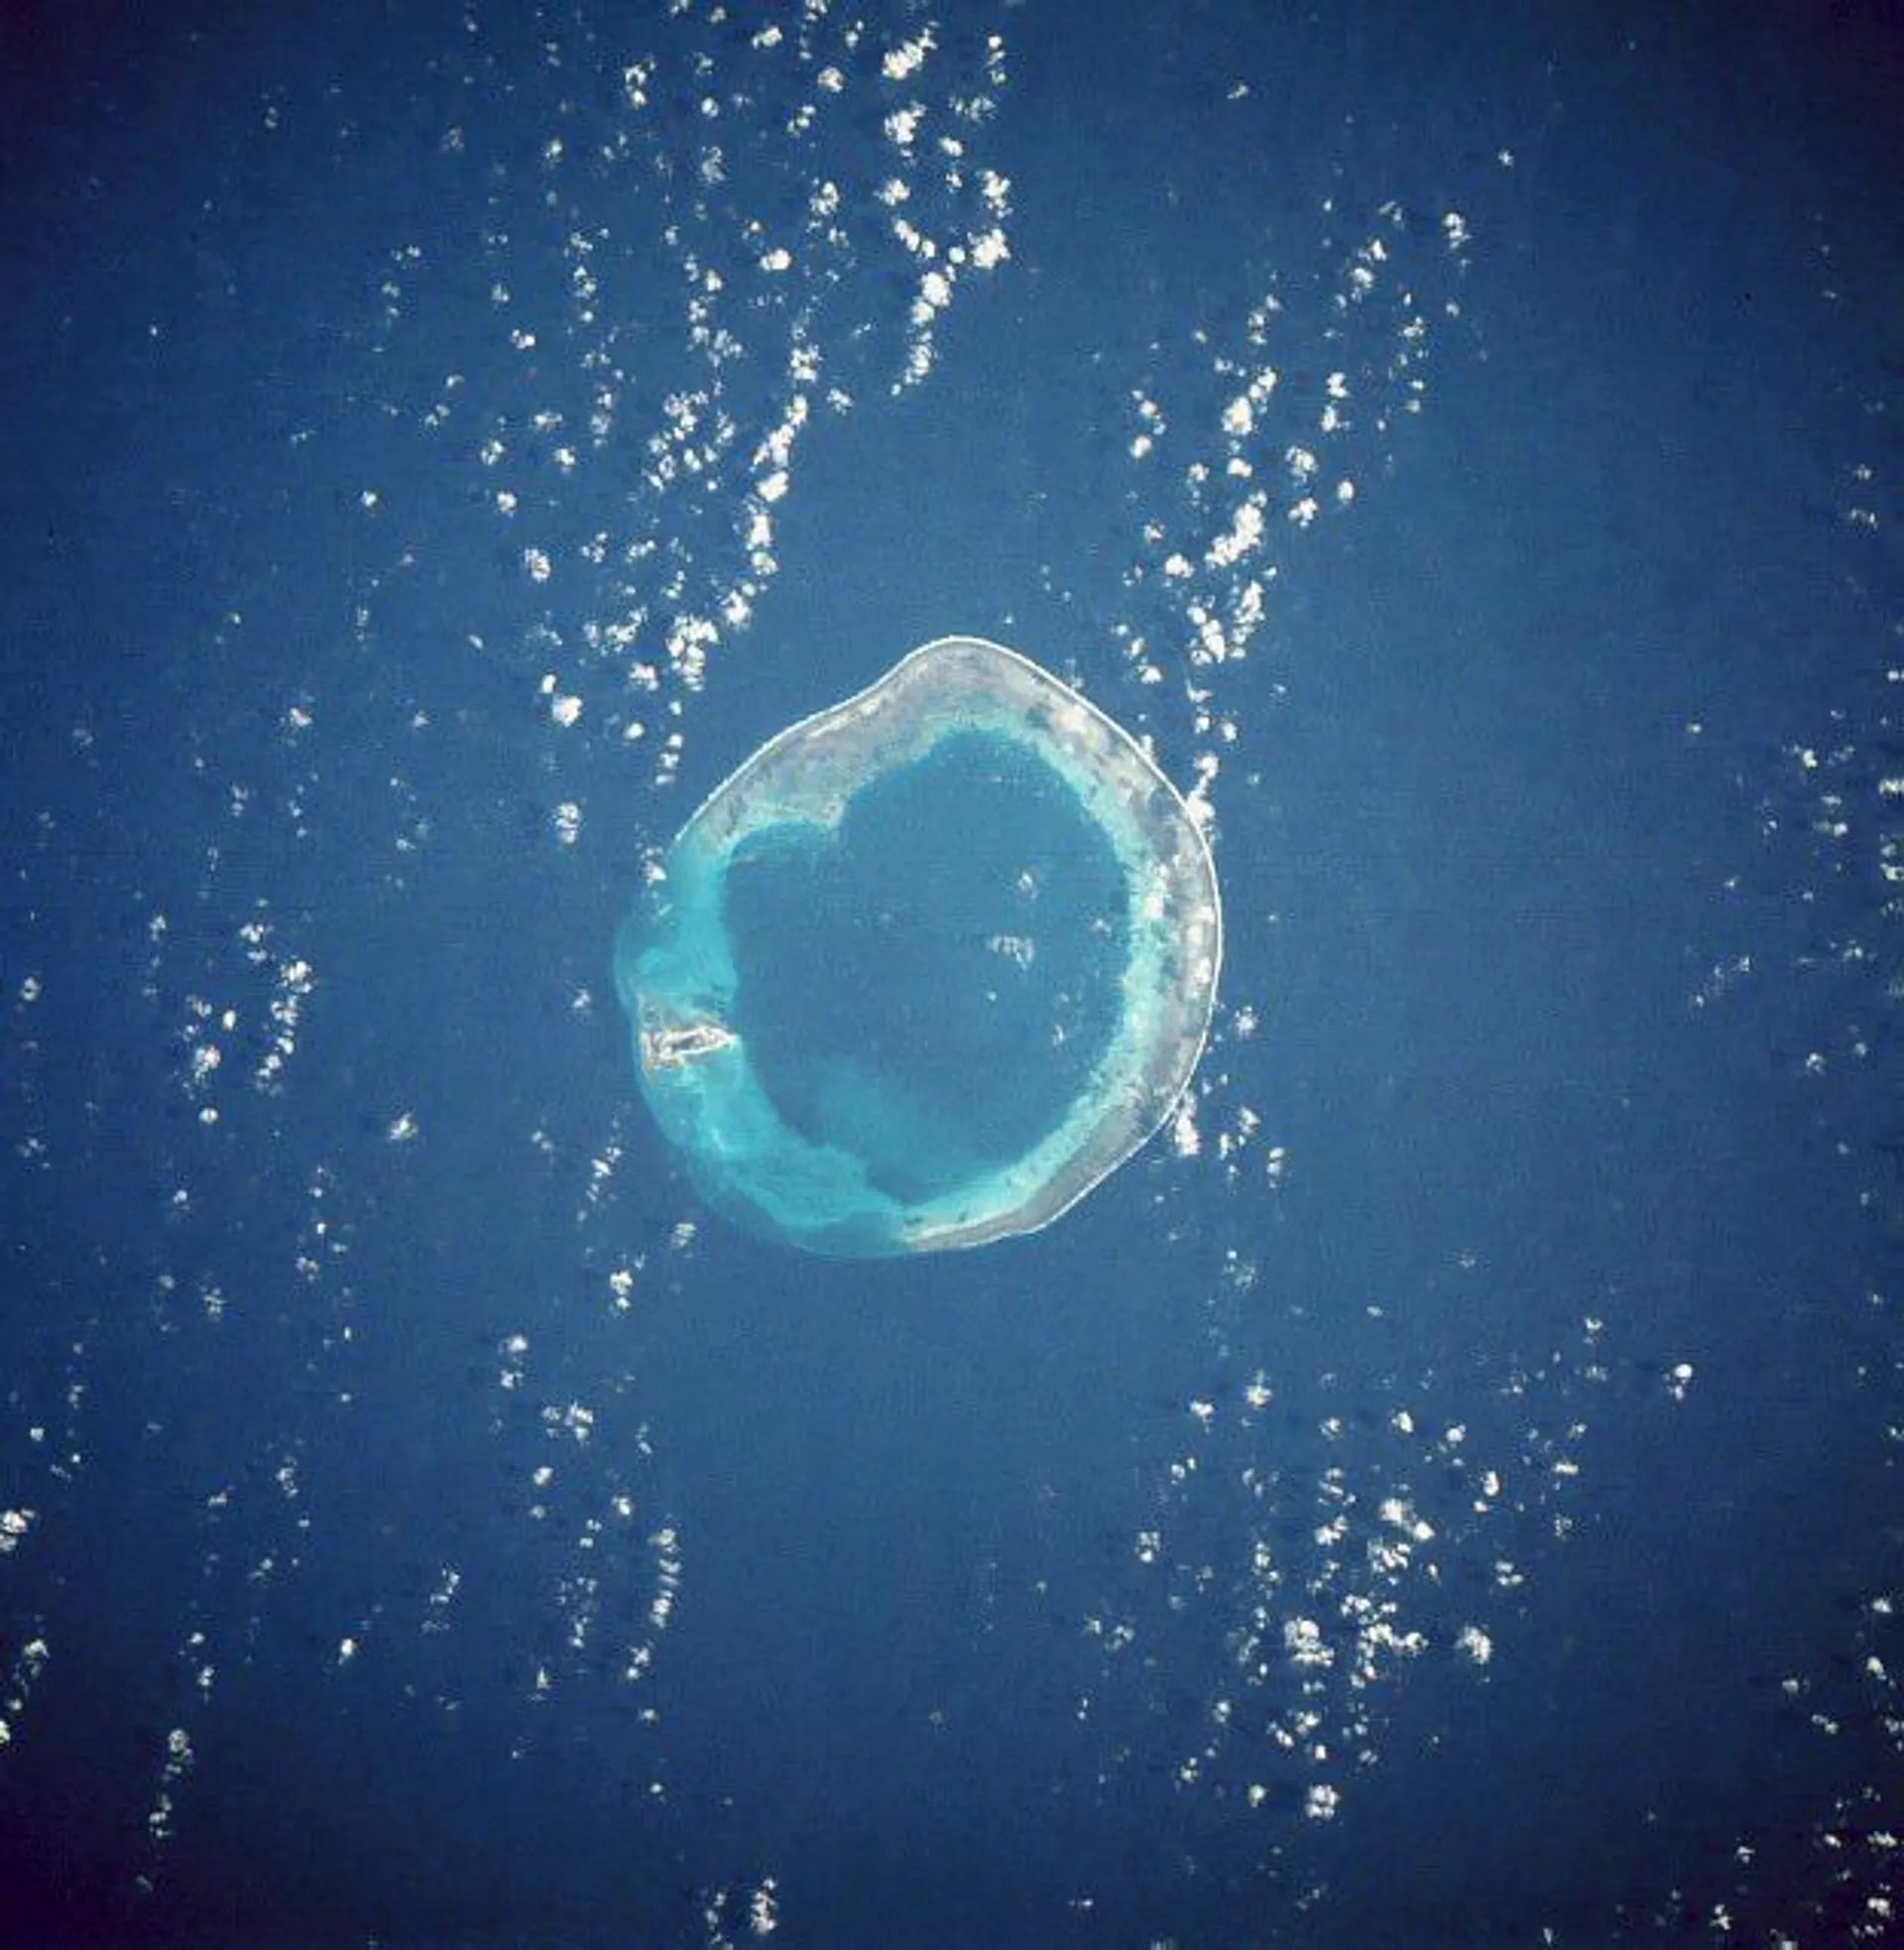 Satellite photo of Pratas (Dongsha) Island, a 590-acre island which sits 270 miles south of Taiwan and 200 miles east of China in the South China Sea. It is controlled by Taiwan. The island is on the left side - the rest is submerged reef. - Sputnik International, 1920, 15.05.2023